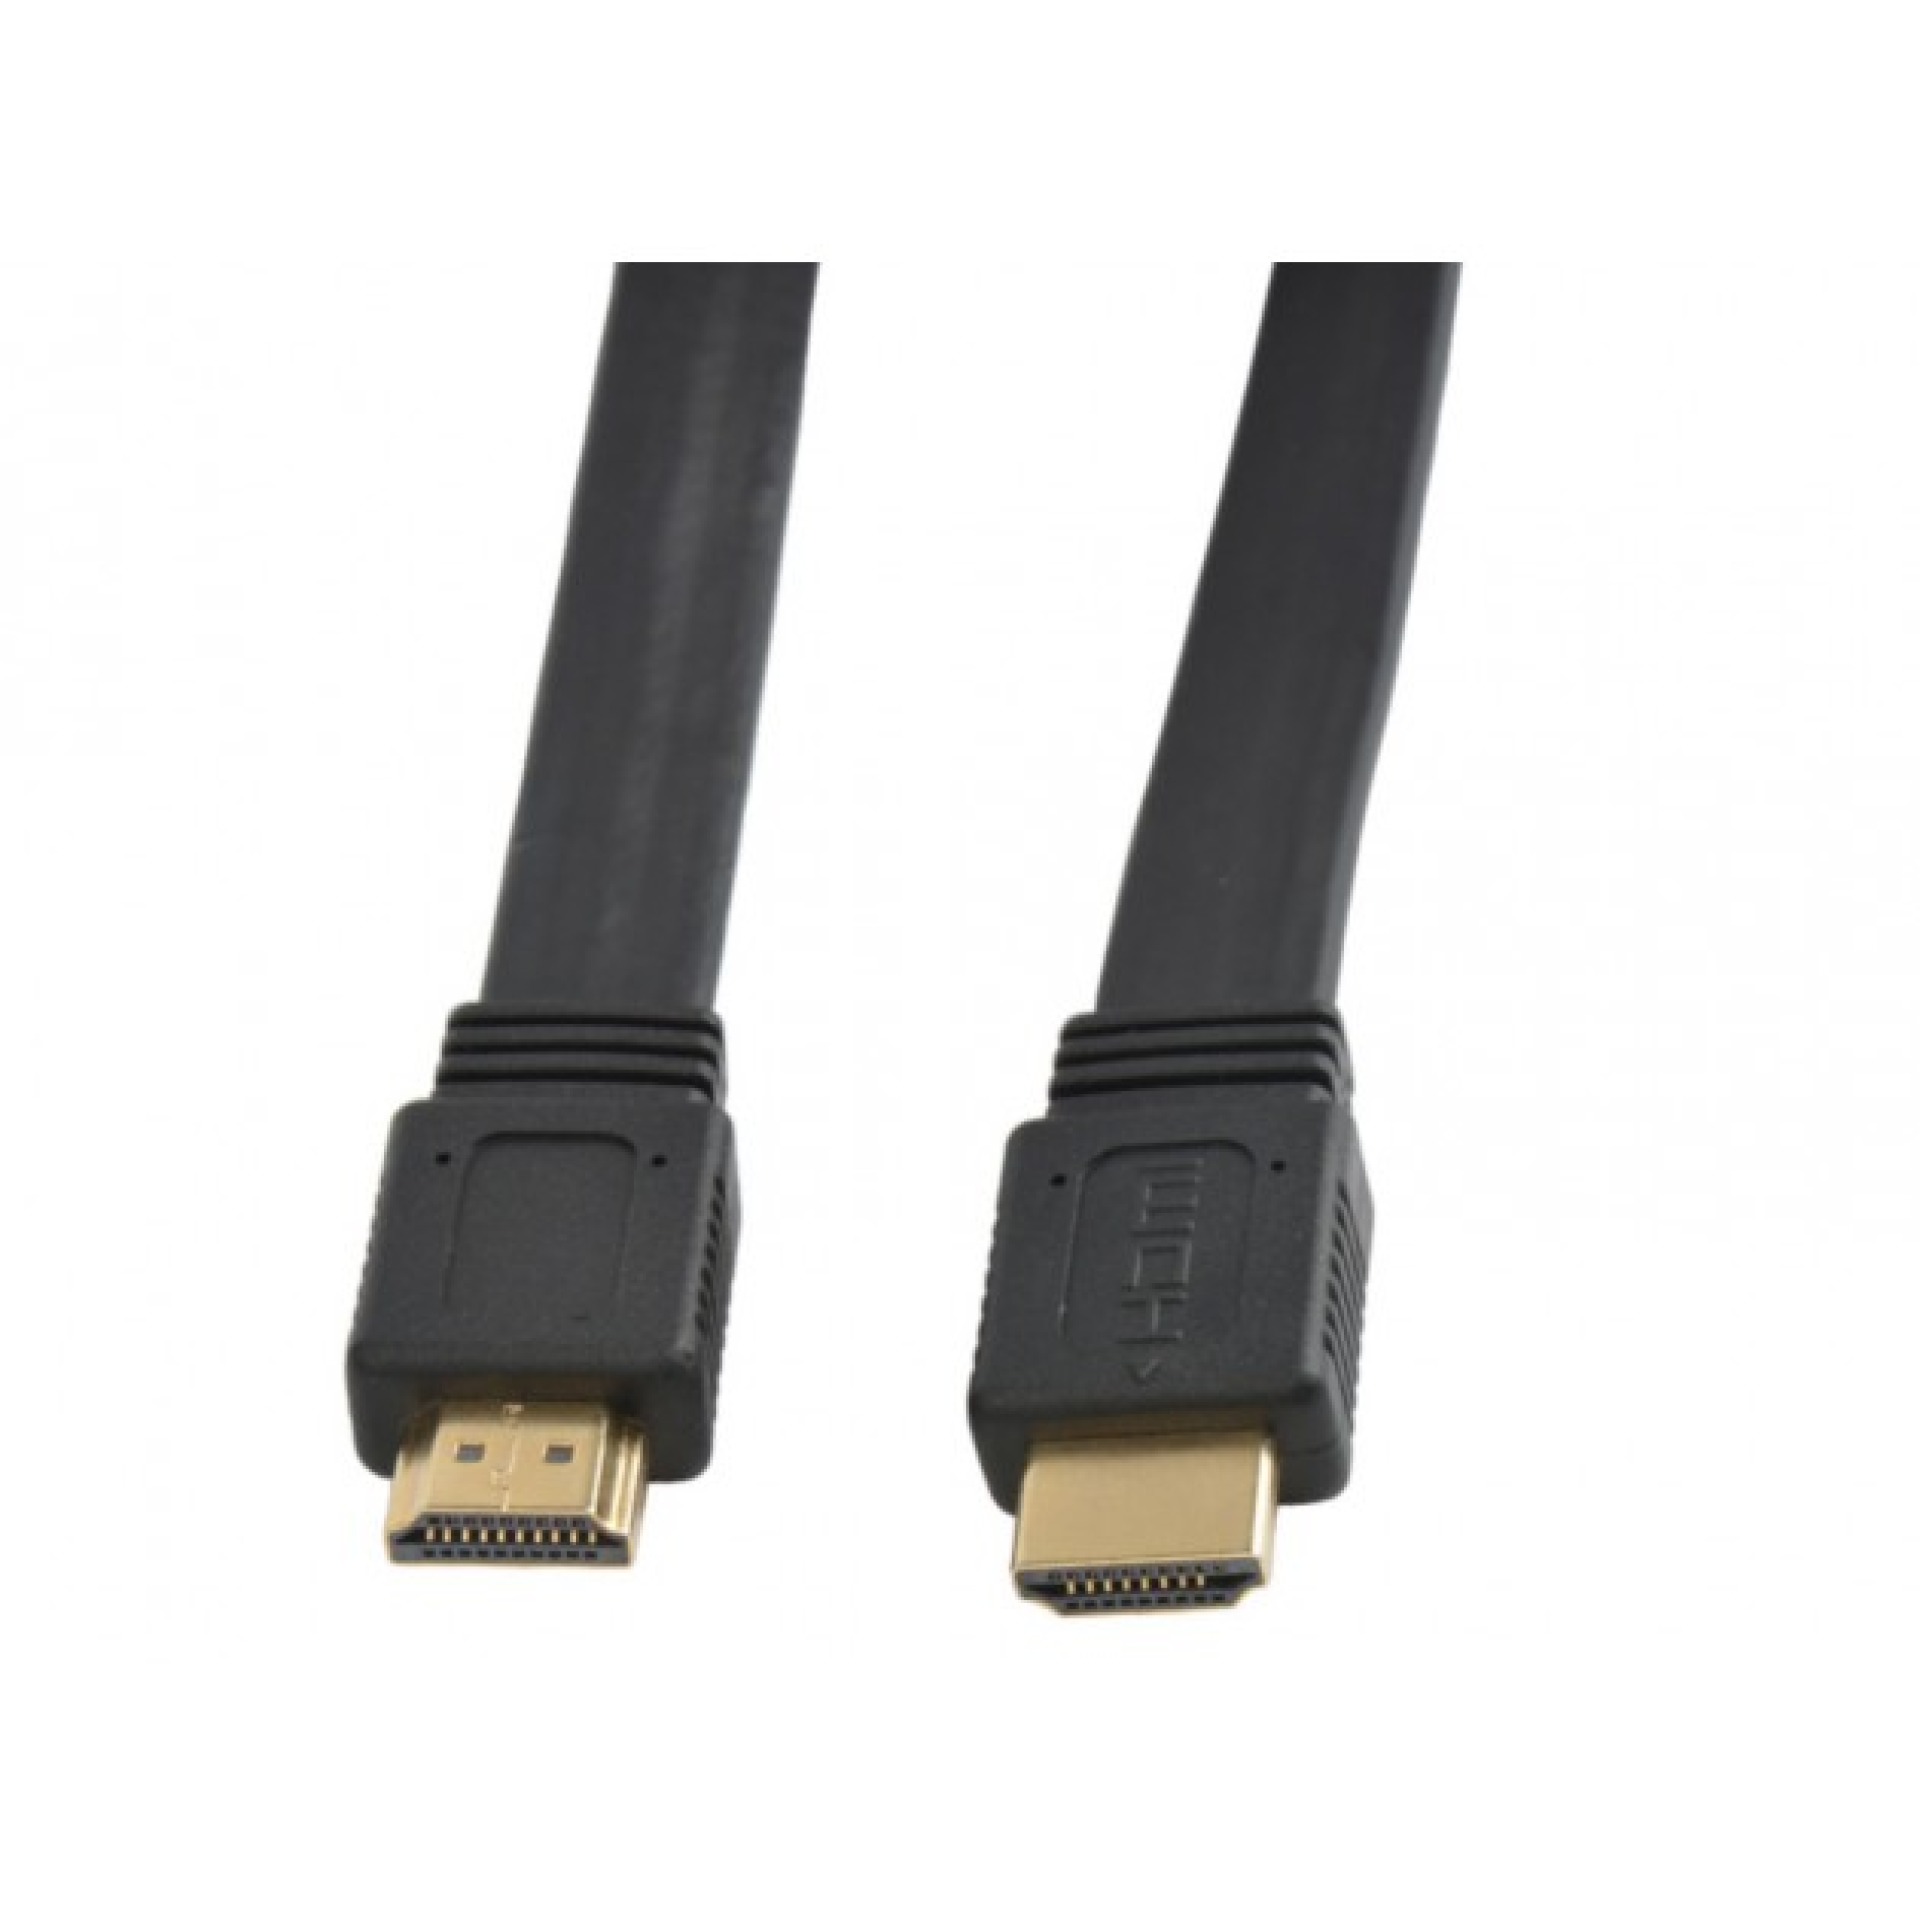 HDMI High Speed with Ethernet Flat Cable 4K 60Hz 3m